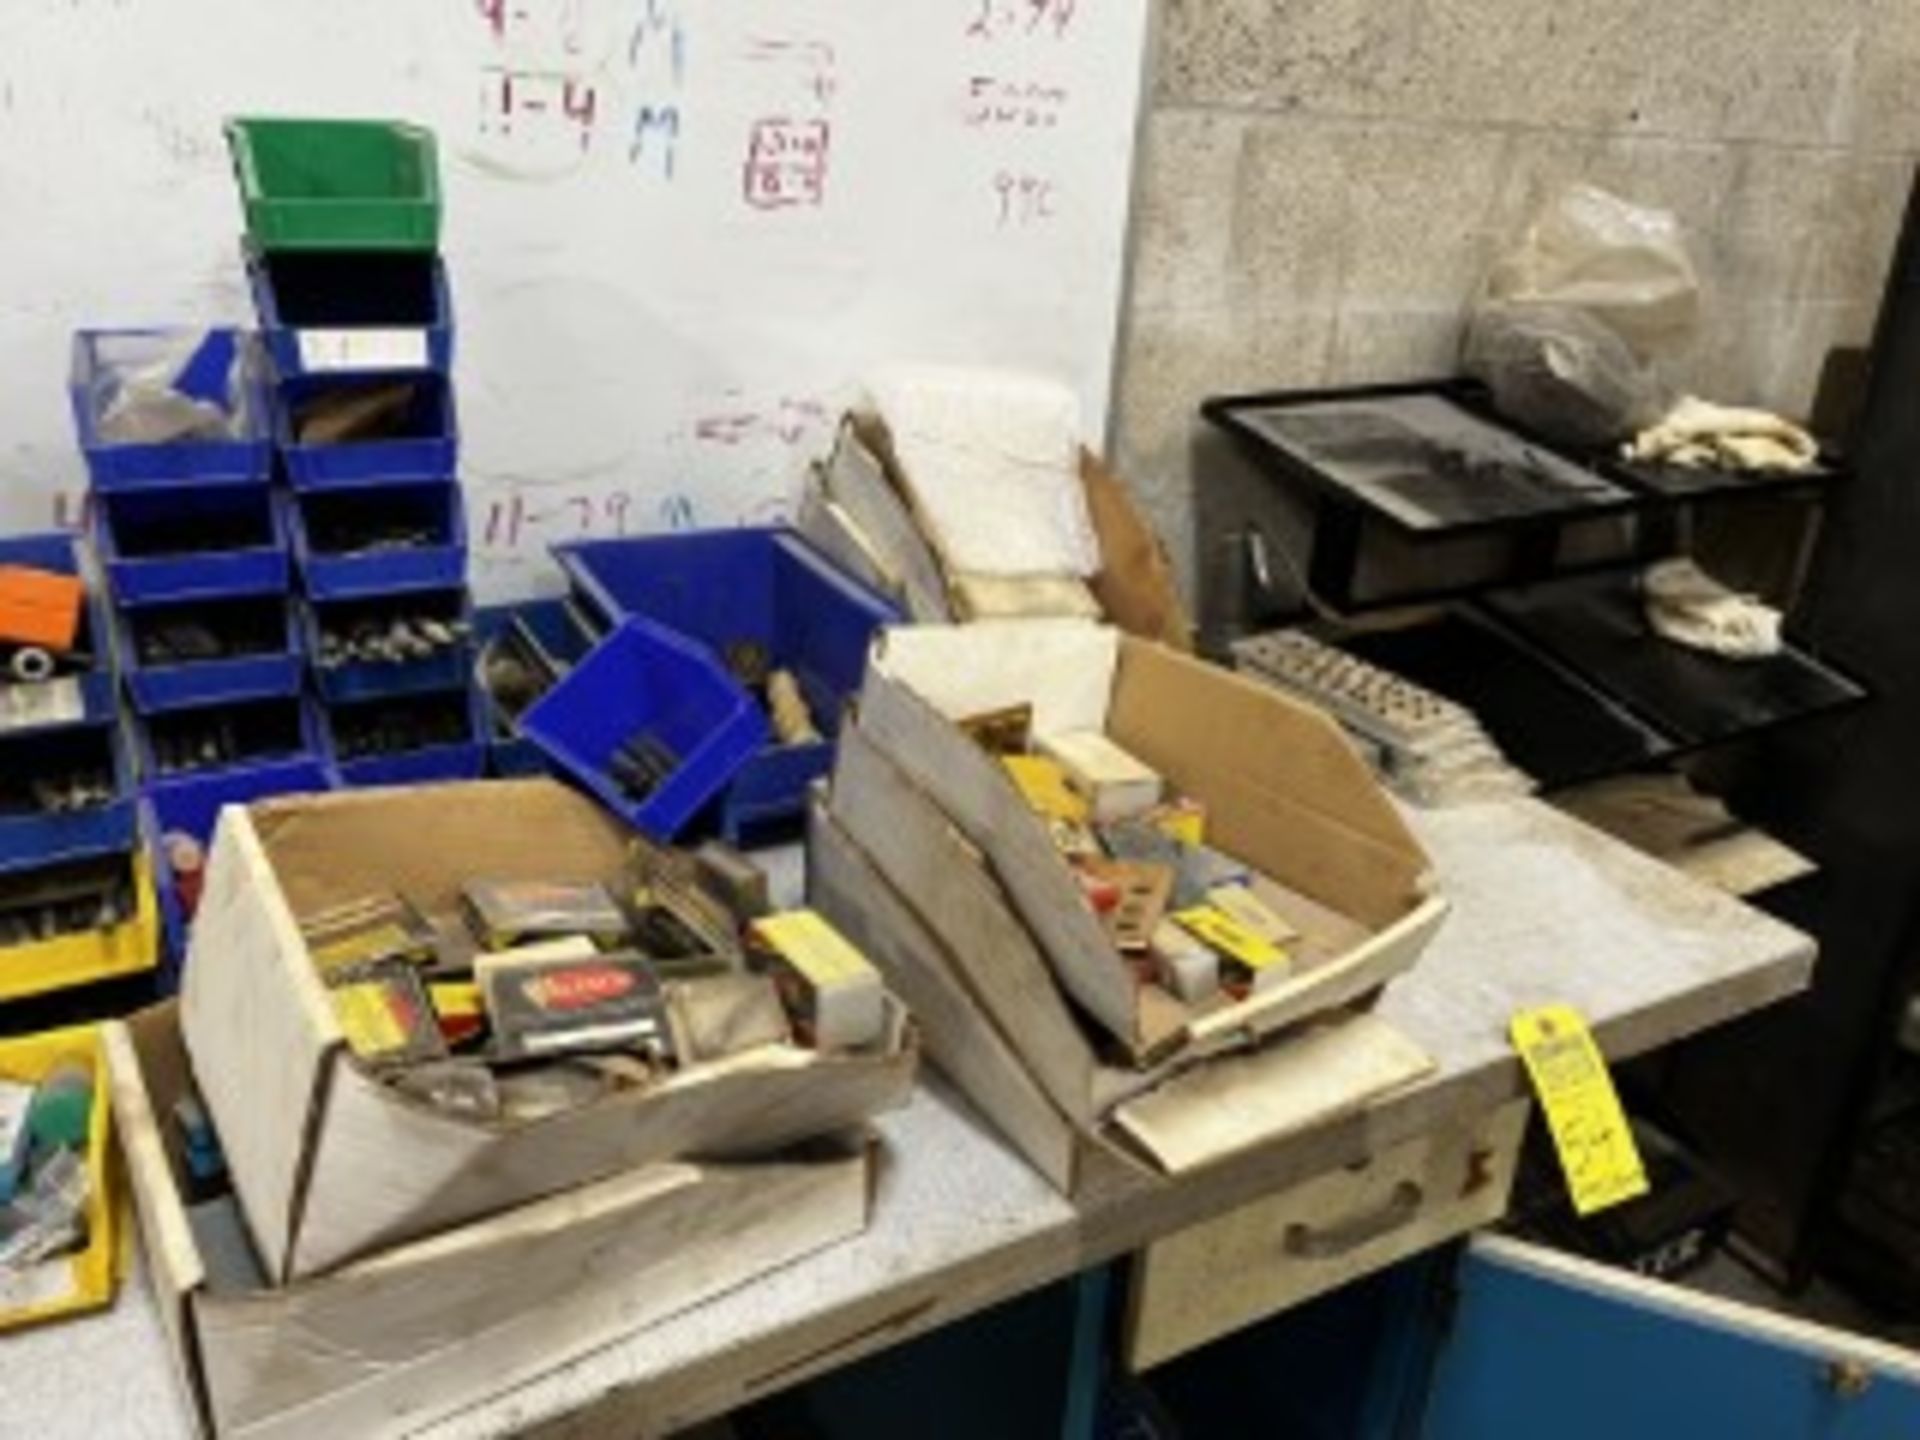 BOXES & BINS ASSORTED INSERTS, DRILL BITS, COLLET, ETC (CONTENTS ON TABLE) - Image 4 of 4